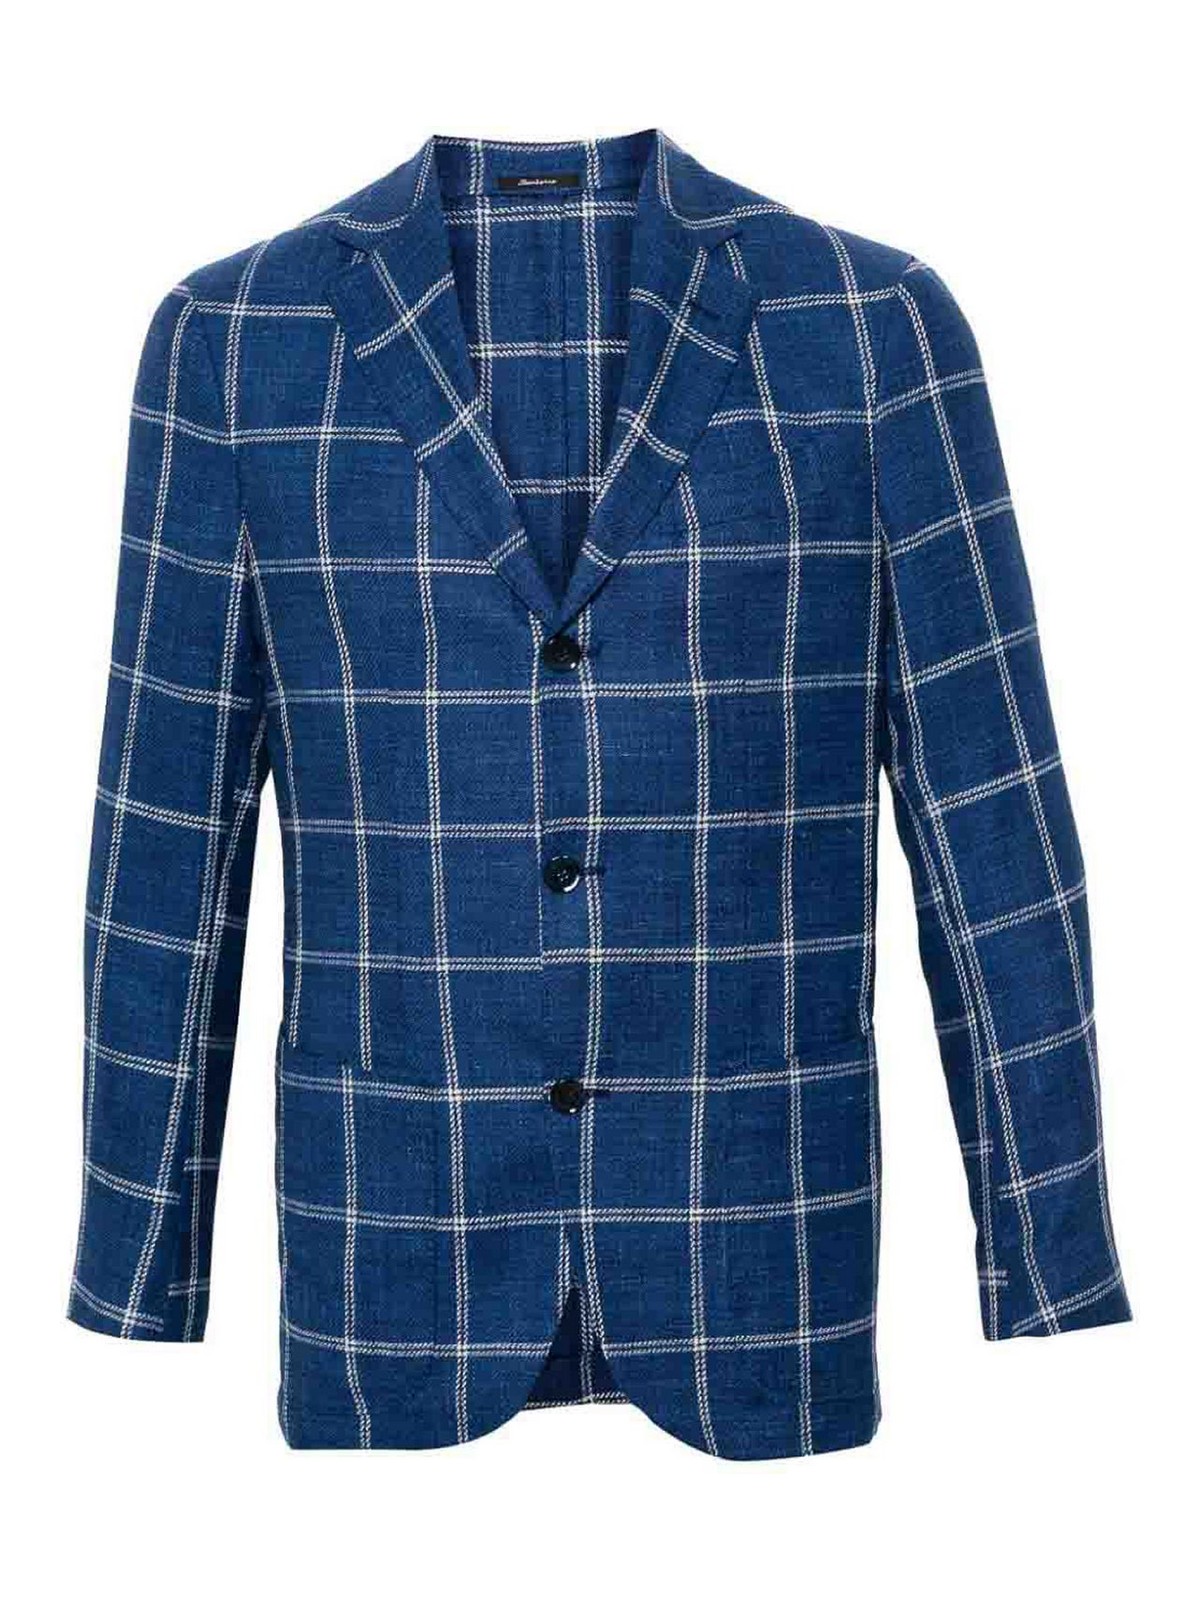 Sartorio Wool And Cotton Blend Jacket In Azul